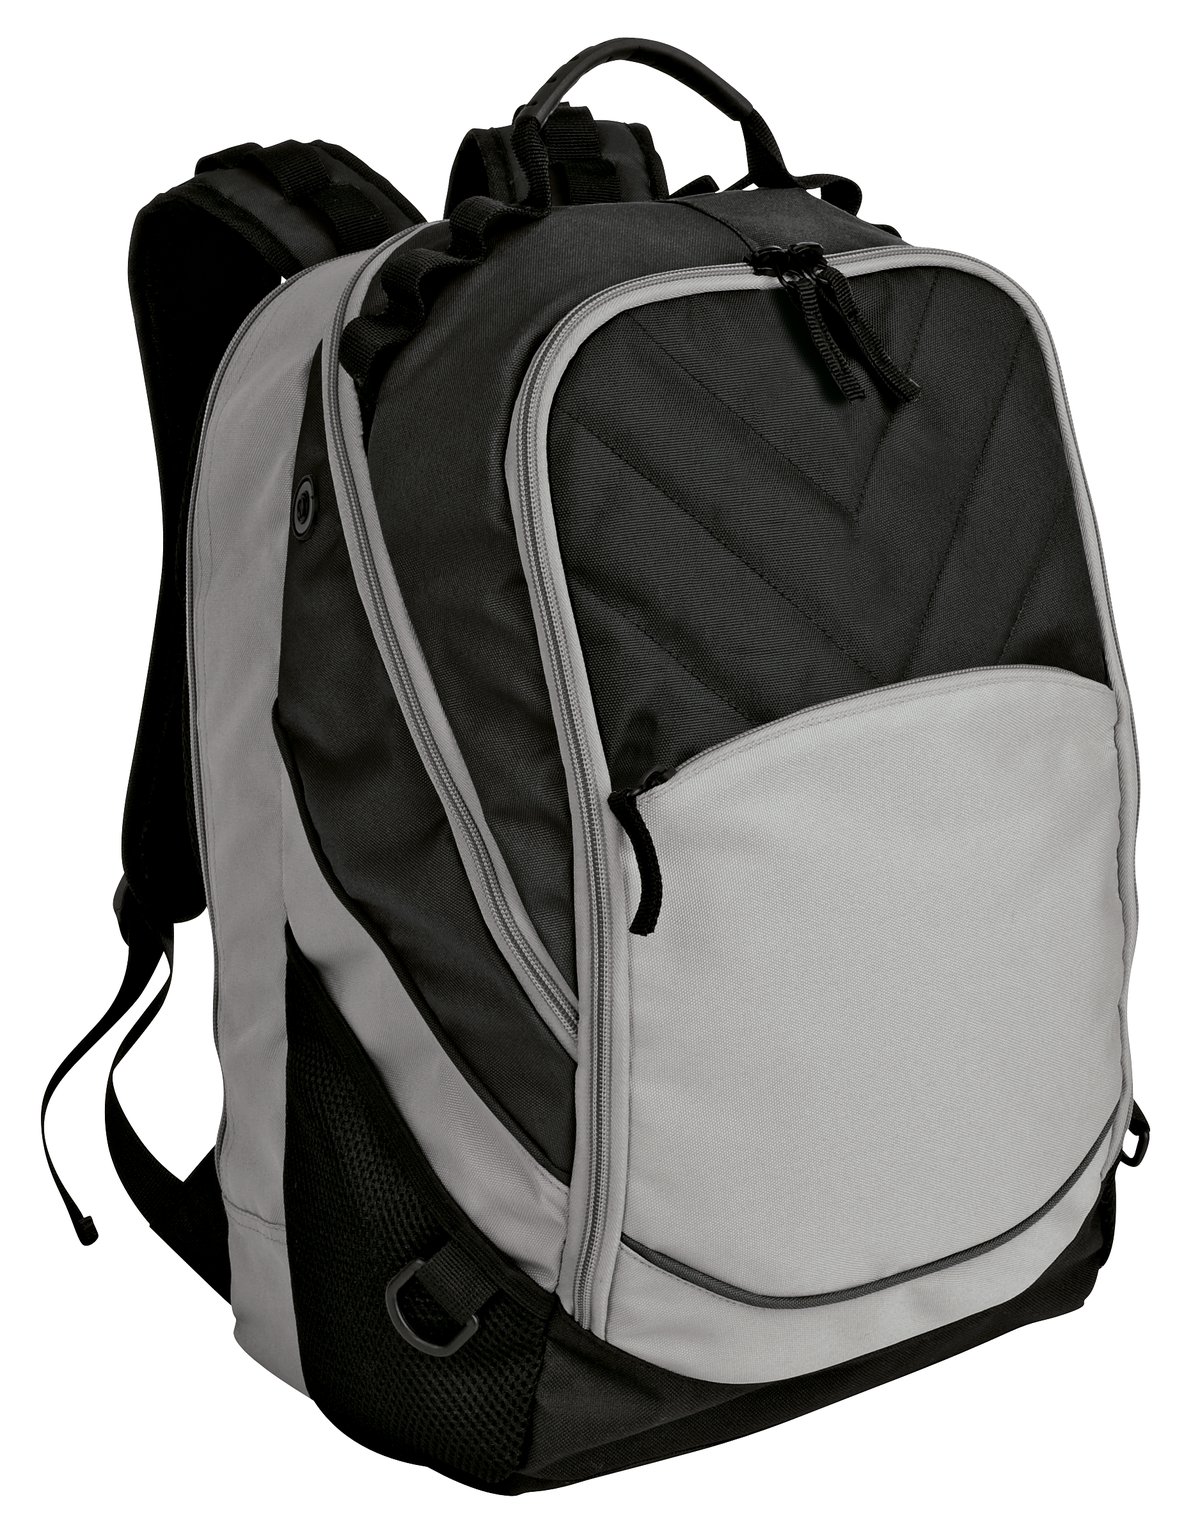 Comfortable Computer Backpack - image 1 of 1